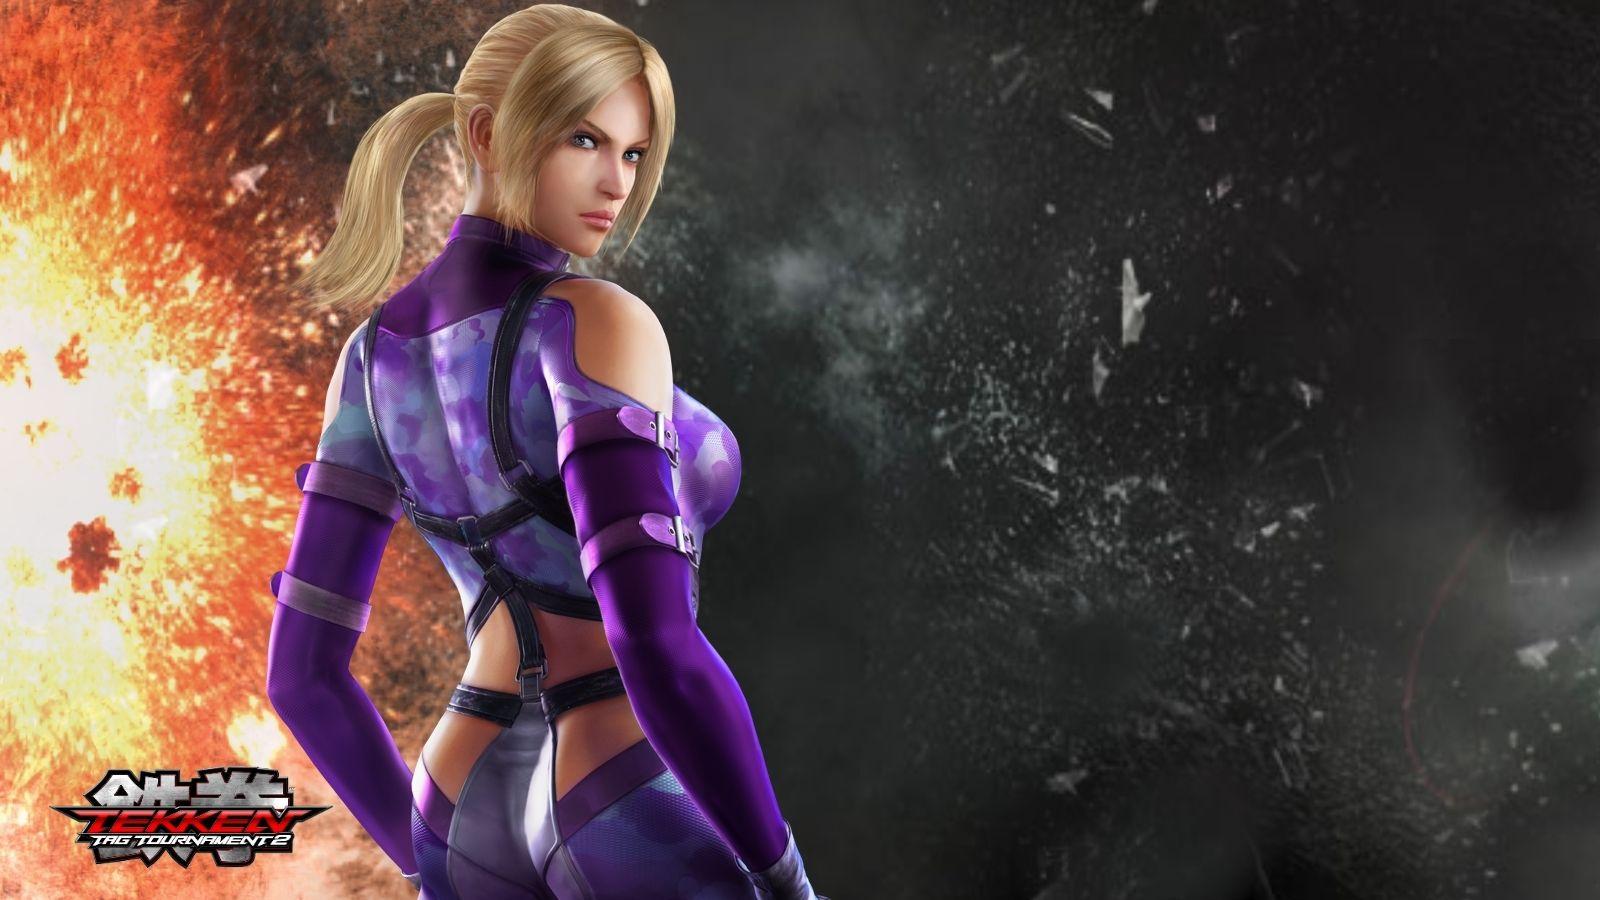 Nina Williams Wallpaper and Background Imagex900